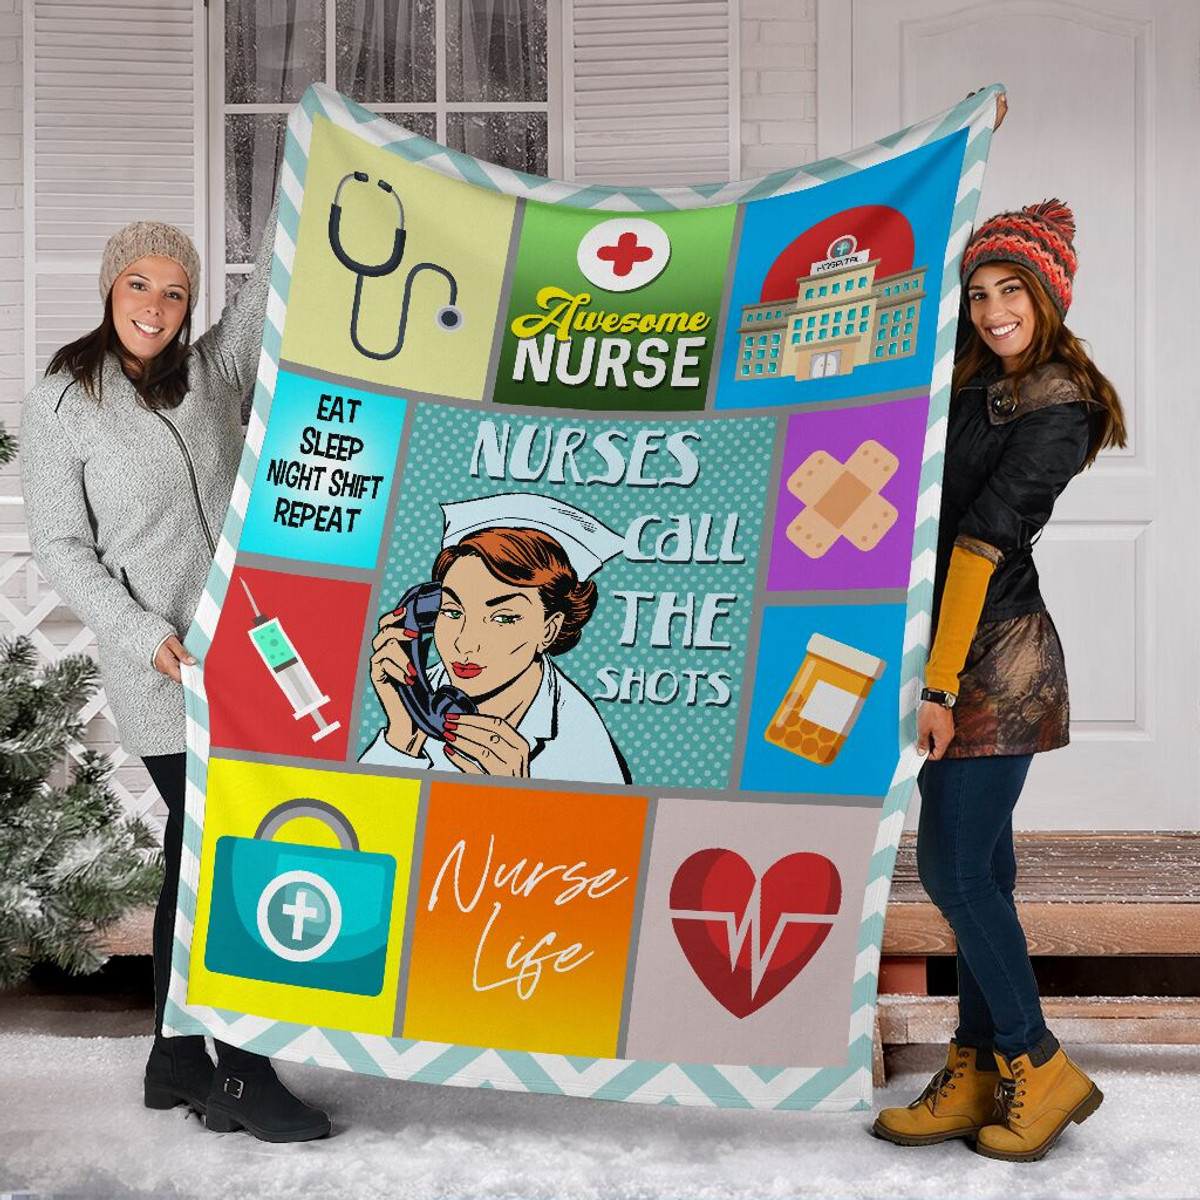 [Customized] Awesome NURSE LIFE BLANKET | Cozy Premium Fleece Sherpa Woven Blanket| Best gift for Nurses Healthcare workers